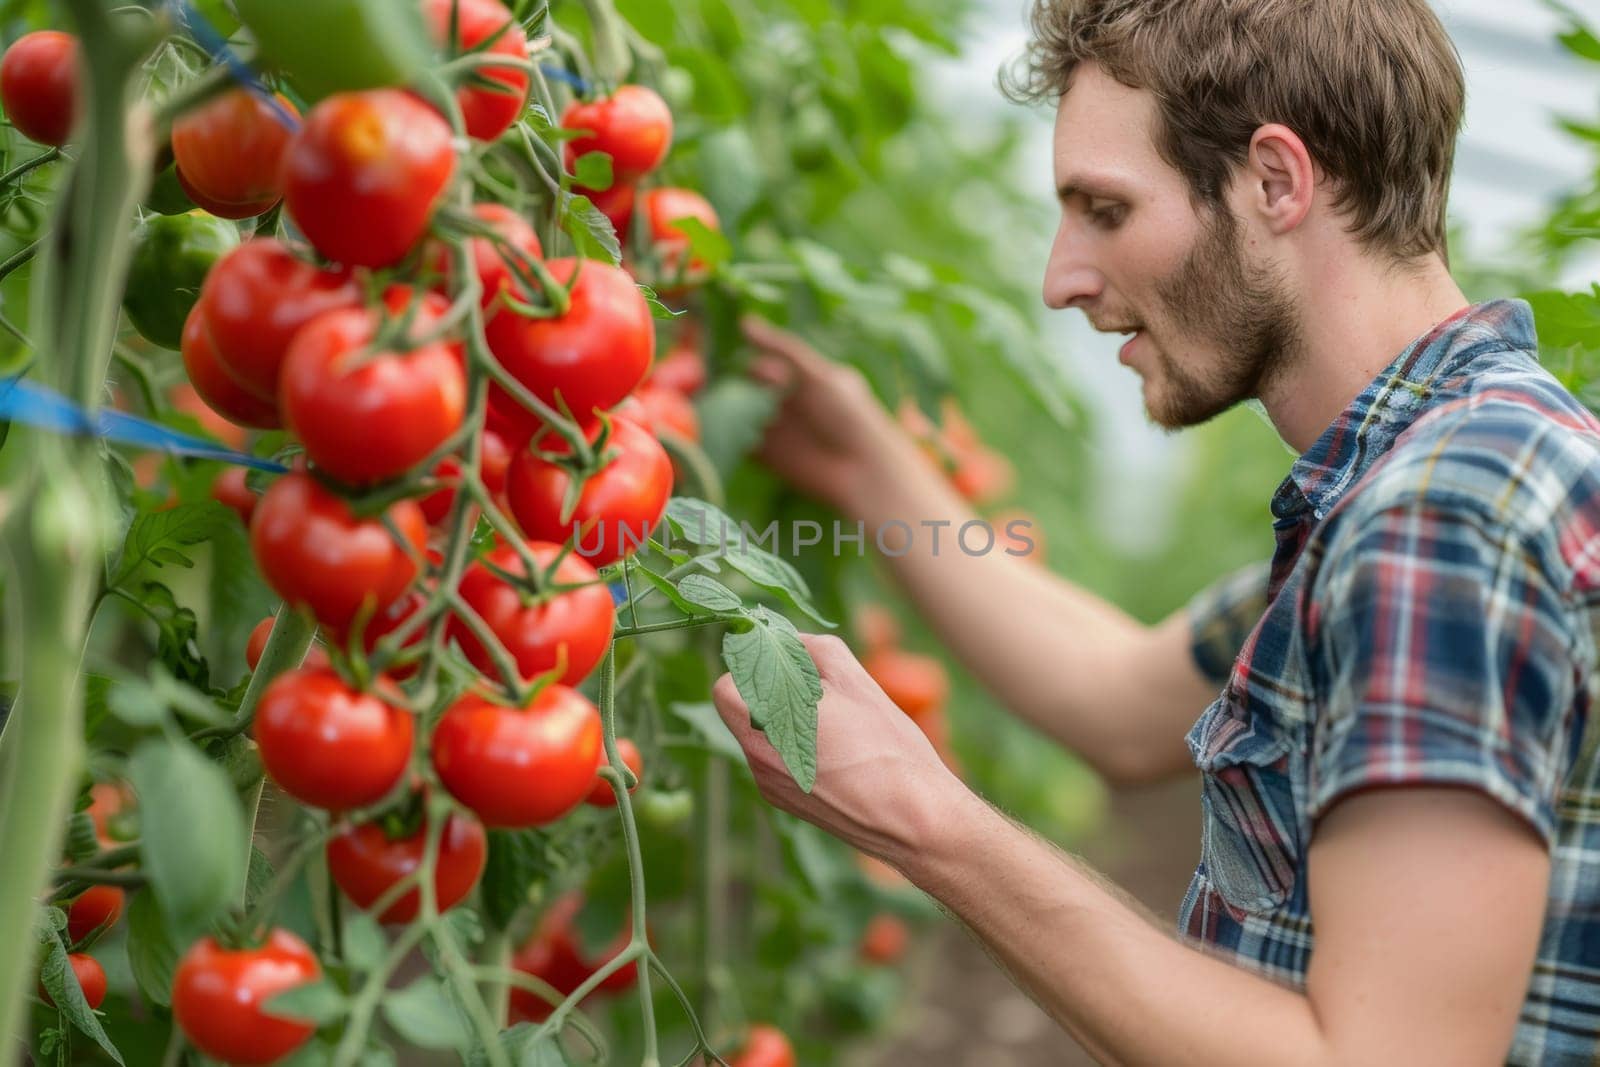 Young Farmer Inspecting Tomato Plants in Greenhouse. A Portrait of Sustainable Agriculture and Local Produce